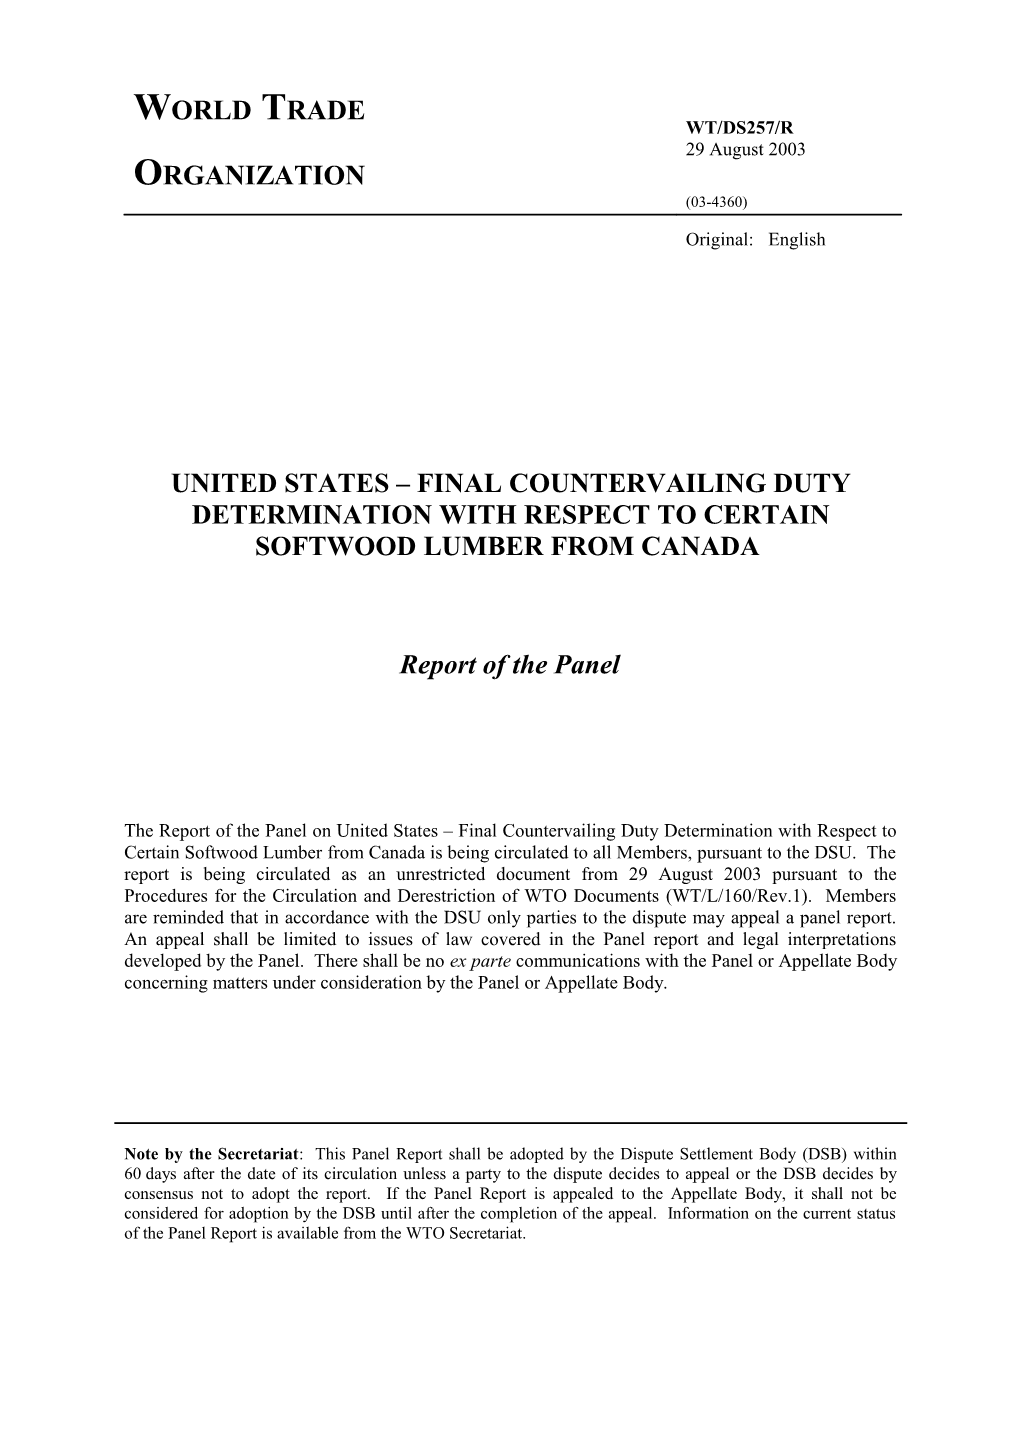 Interim Report on United States Final Countervailing Duty Determination with Respect To